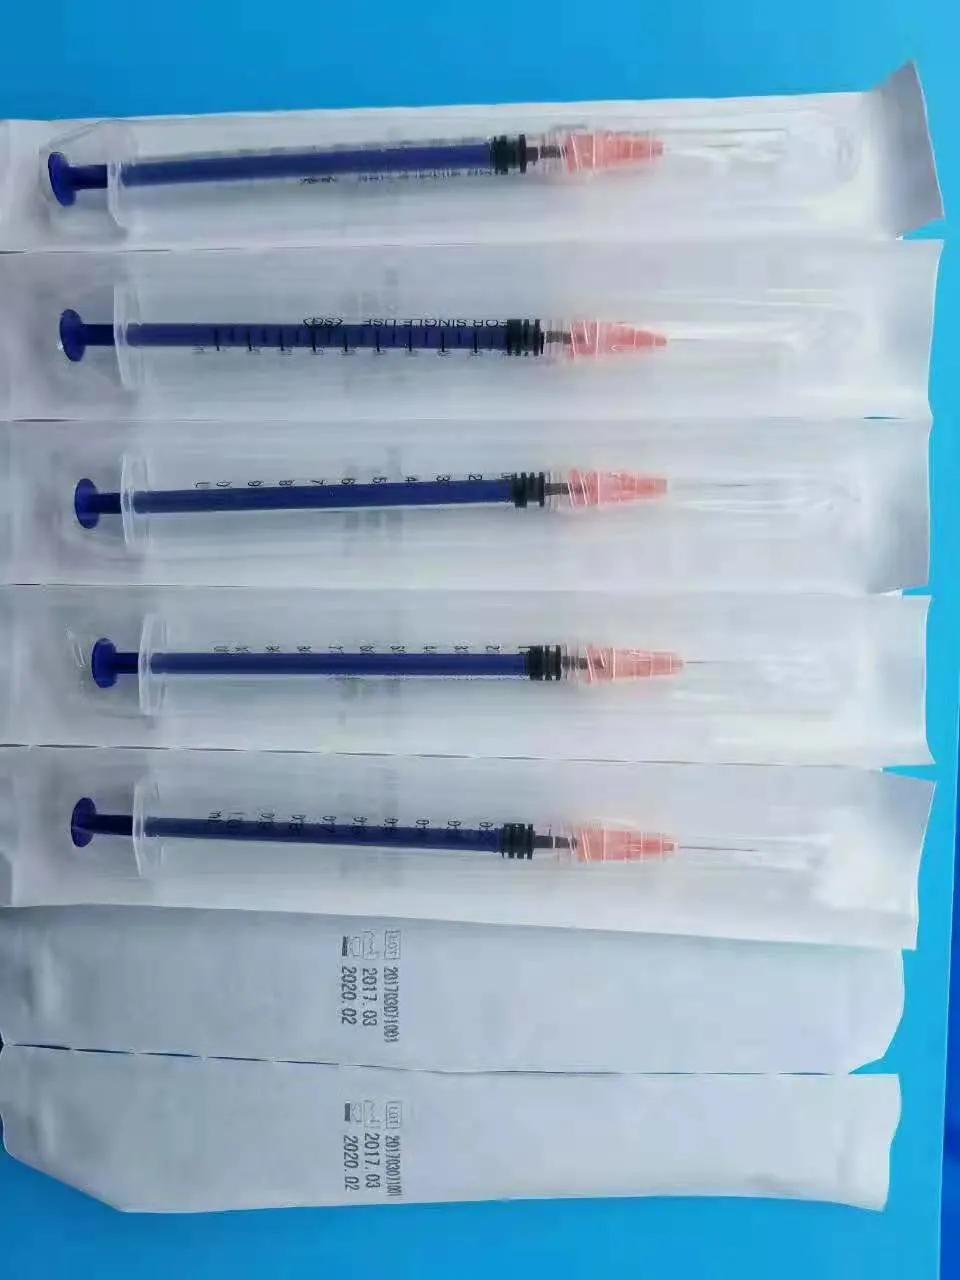 1ml Disposable Syringe Luer Slip with Needle Manufacture with FDA 510K CE&ISO Improved for Vaccine in Stock and Fast Delivery 0.8ml